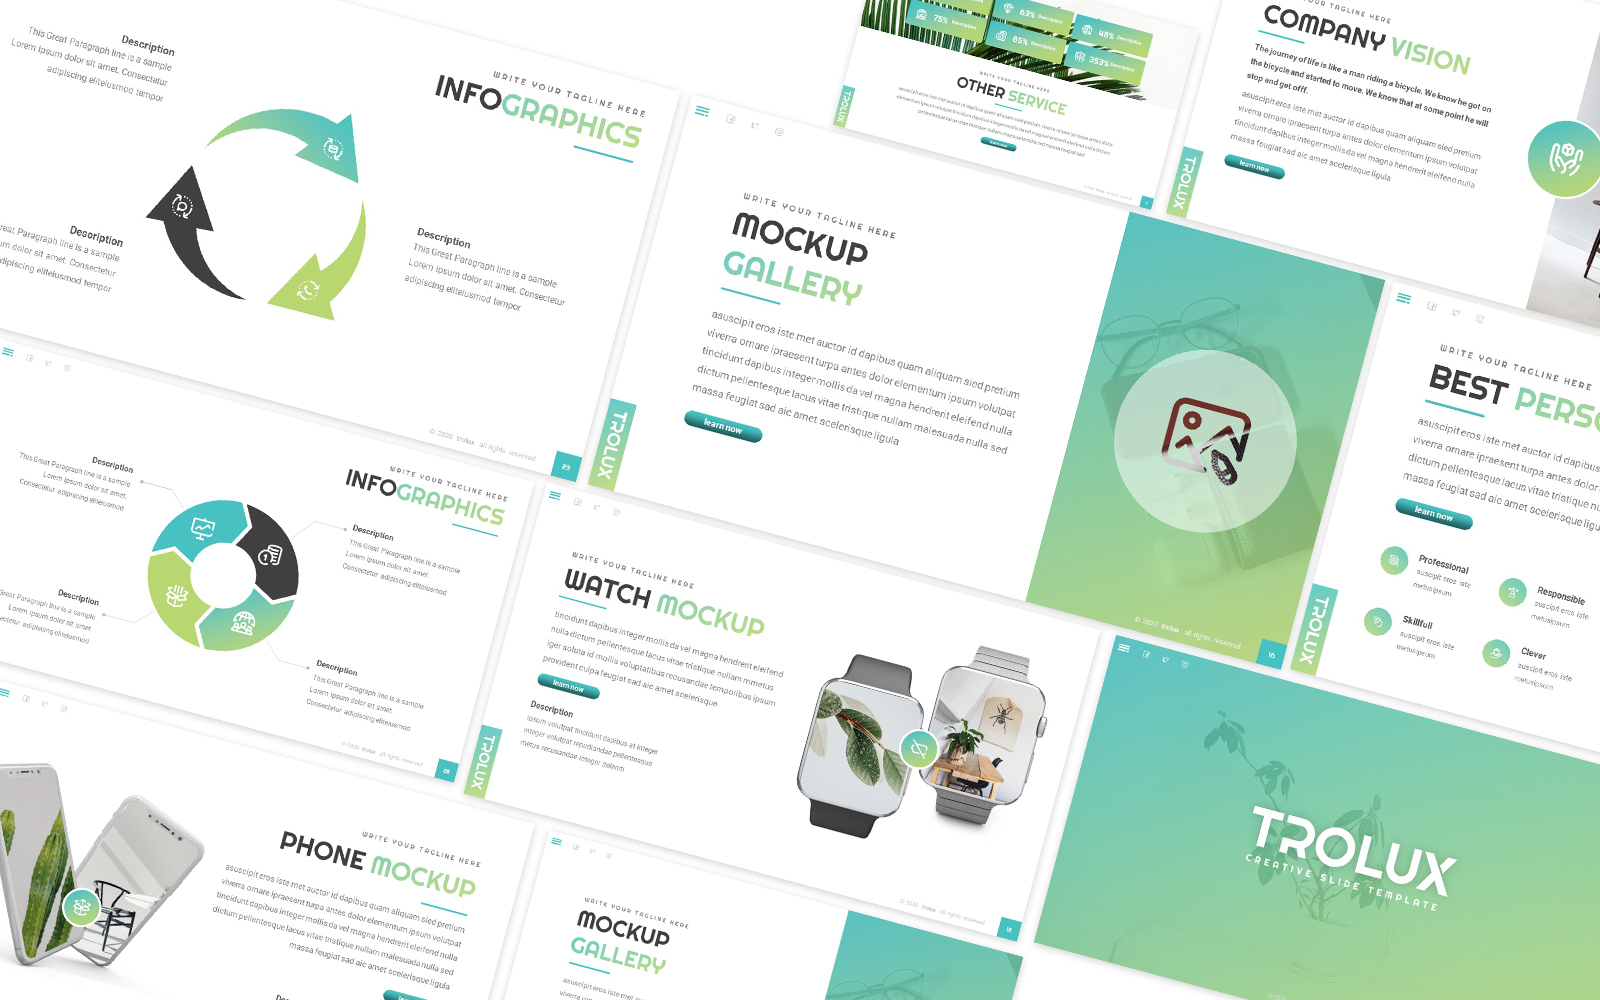 Trolux Creative Powerpoint Template